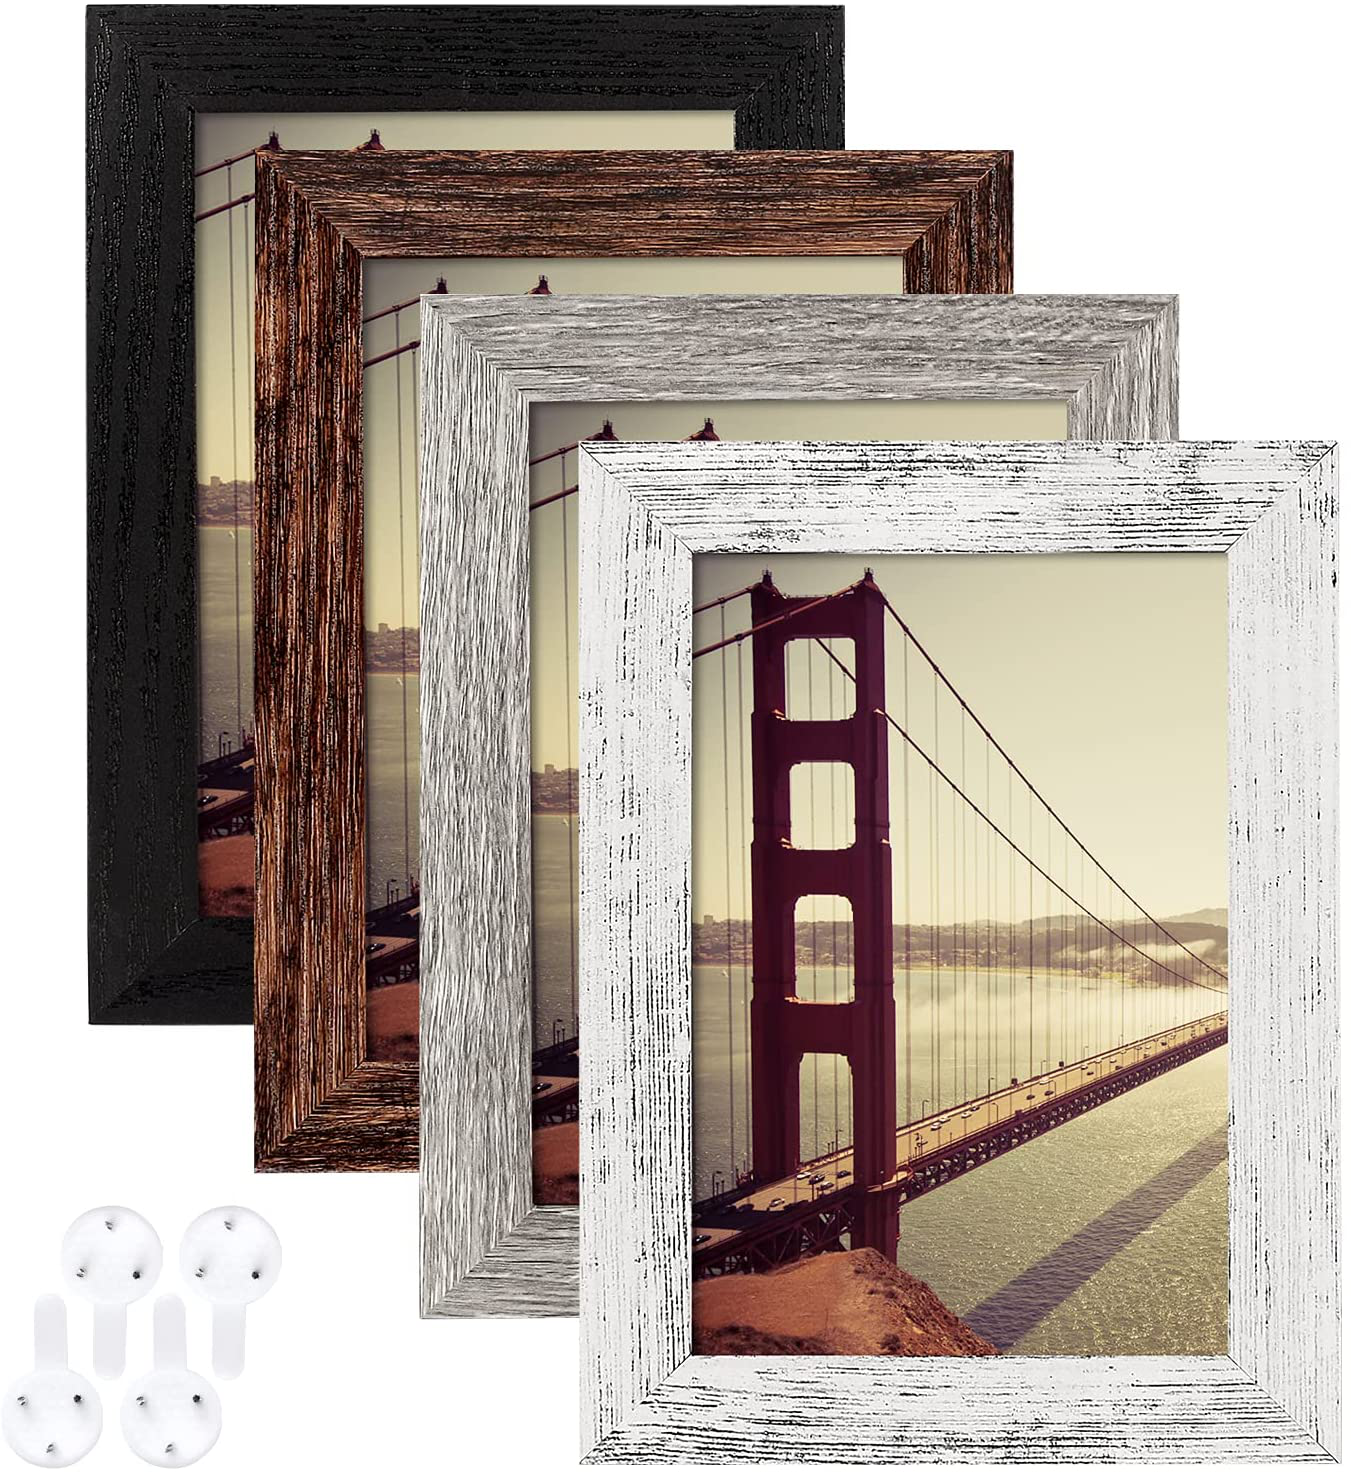 BAIJIALI 8x10 Picture Frame Rustic Grey Wood Pattern Set of 4 with Tempered Glass,Display Pictures 5x7 with Mat or 8x10 Without Mat, Horizontal and Vertical Formats for Wall and Table Mounting